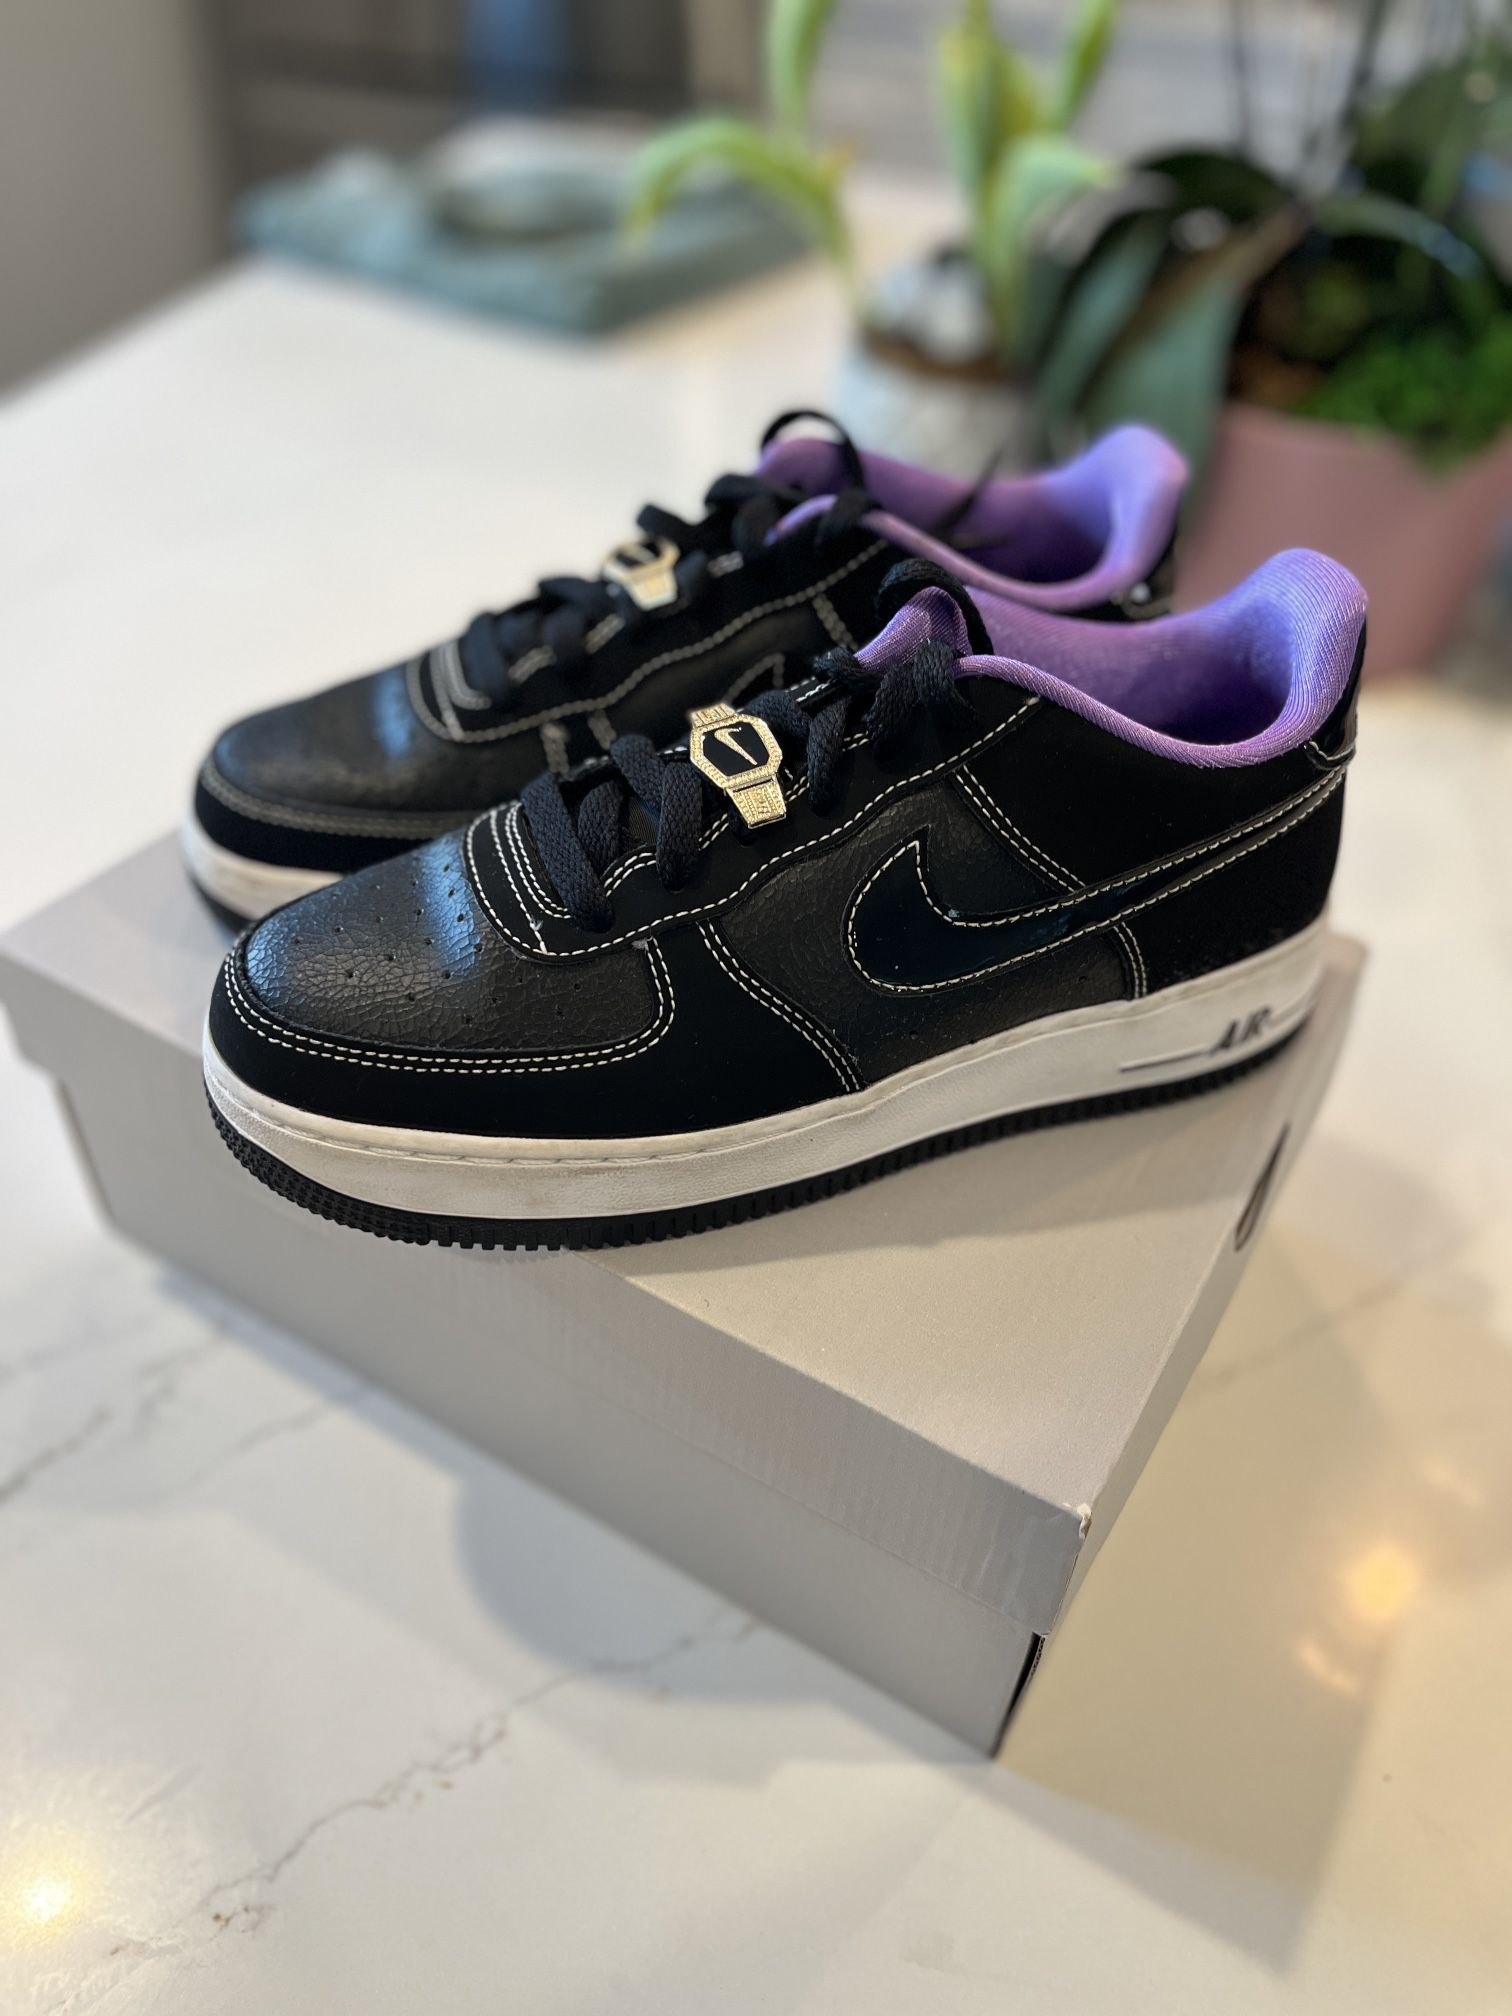 Boys 6.5-Nike Air Force 1 Low 07 EMB World Champion Lakers 